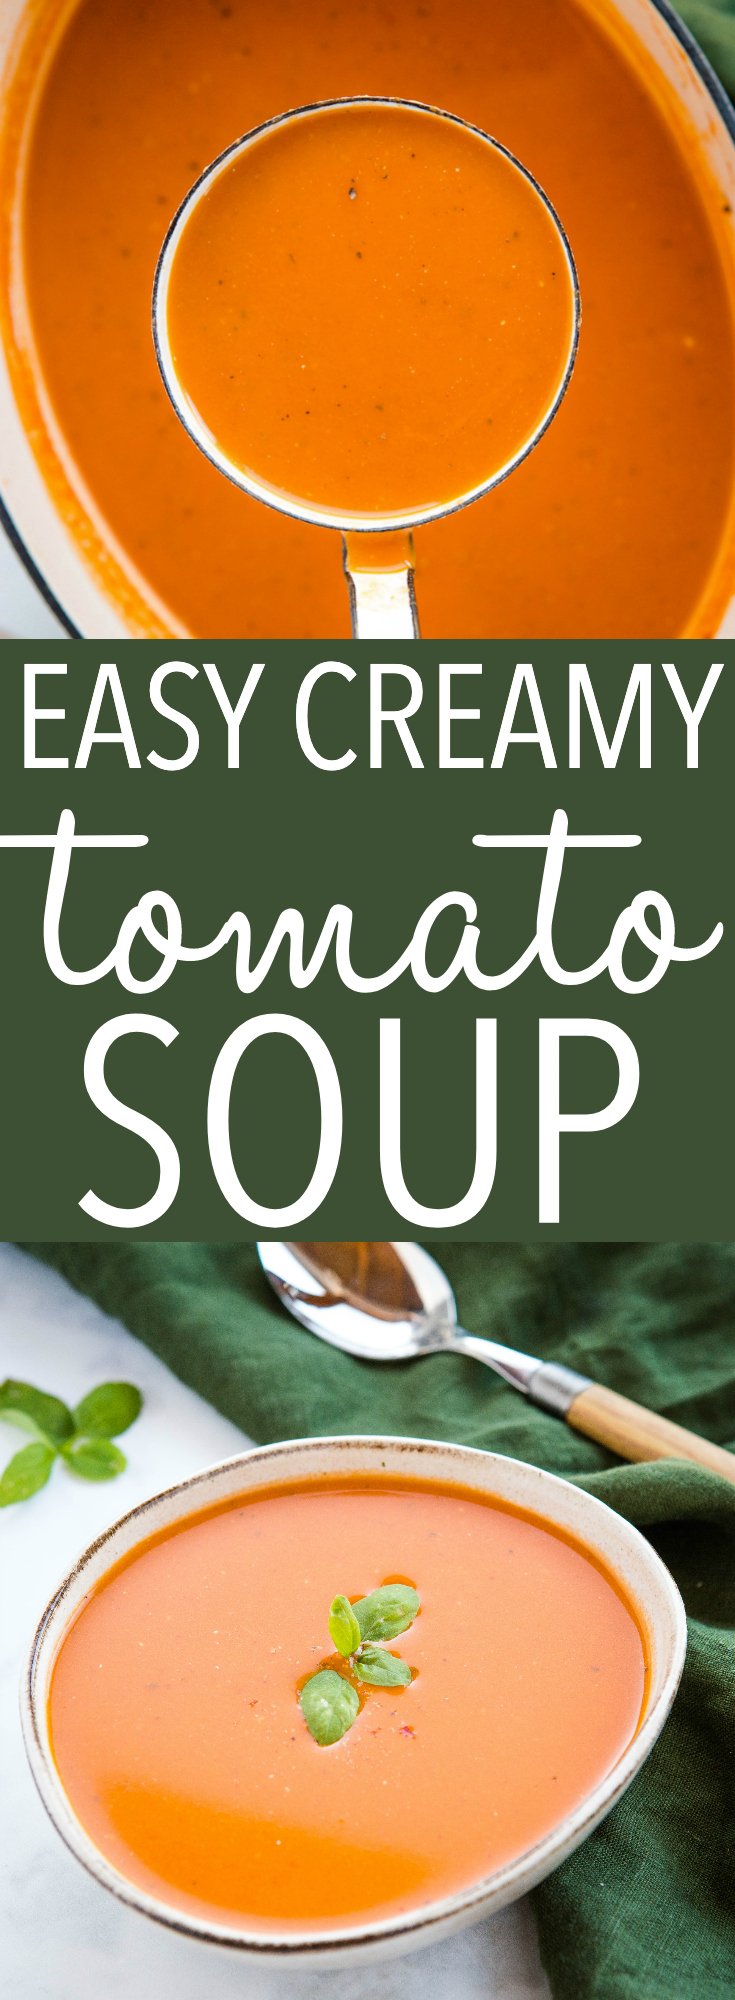 This Easy Homemade Creamy Tomato Soup is the perfect soup to make with only 5 pantry ingredients! It's creamy and smooth and it's easy to make in under 30 minutes! Recipe from thebusybaker.ca! #tomatosoup #tomato #homemade #pantry #easyrecipe #soup #souprecipe #homemadecannedsoup via @busybakerblog